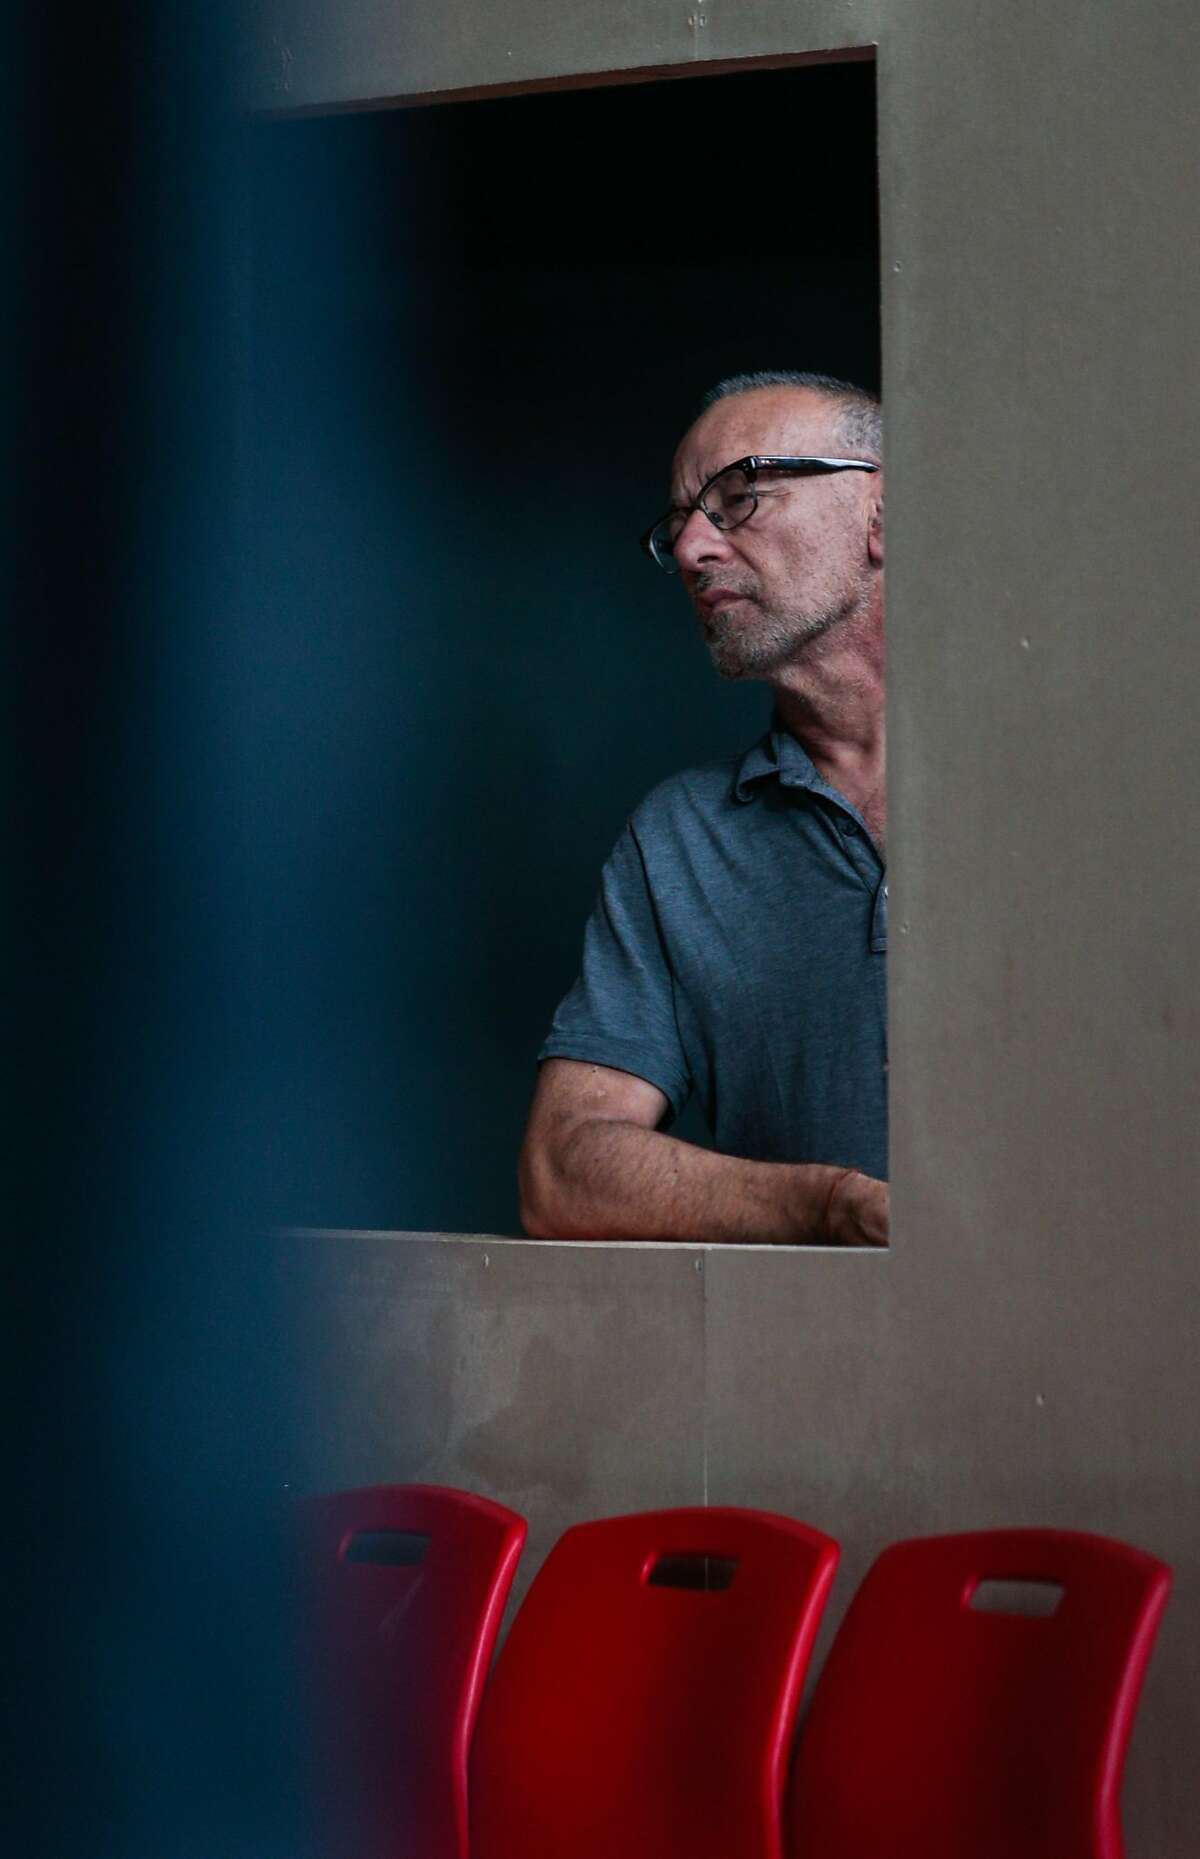 Joe Goode rehearses for his latest work, "Poetics of Space", a blend of drama and choreography in installations which viewers walk through, on Wednesday, Sept. 2, 2015 in San Francisco, Calif. Goode celebrates 30 years working in dance theater this year.